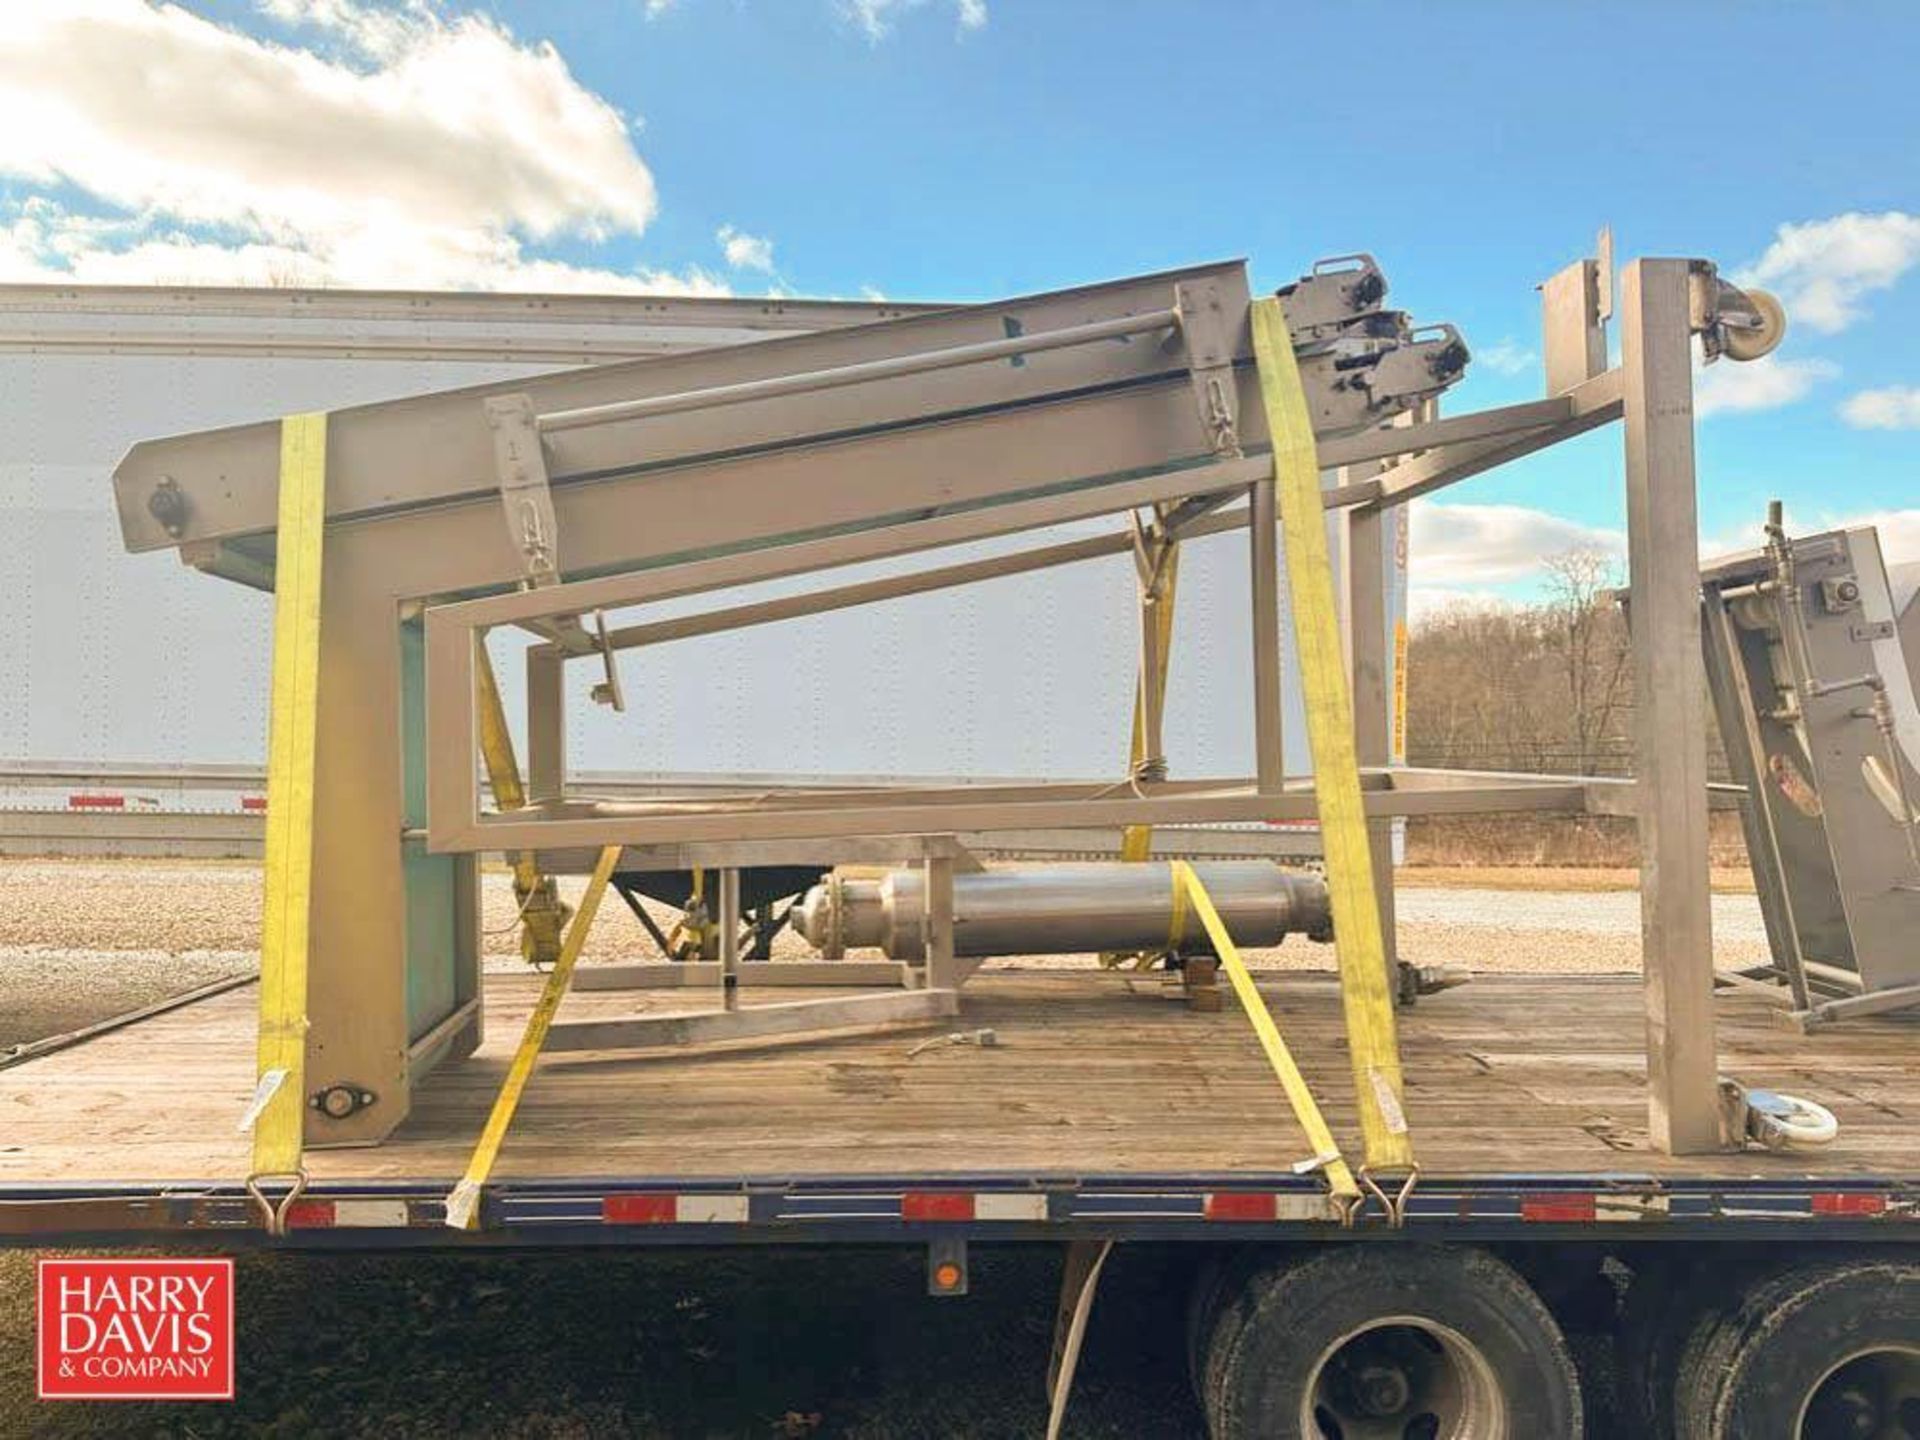 Portable S/S Framed L-Shaped Belt Conveyor: Dimensions: 9' x 26" and 50" x 26" - Rigging Fee: $300